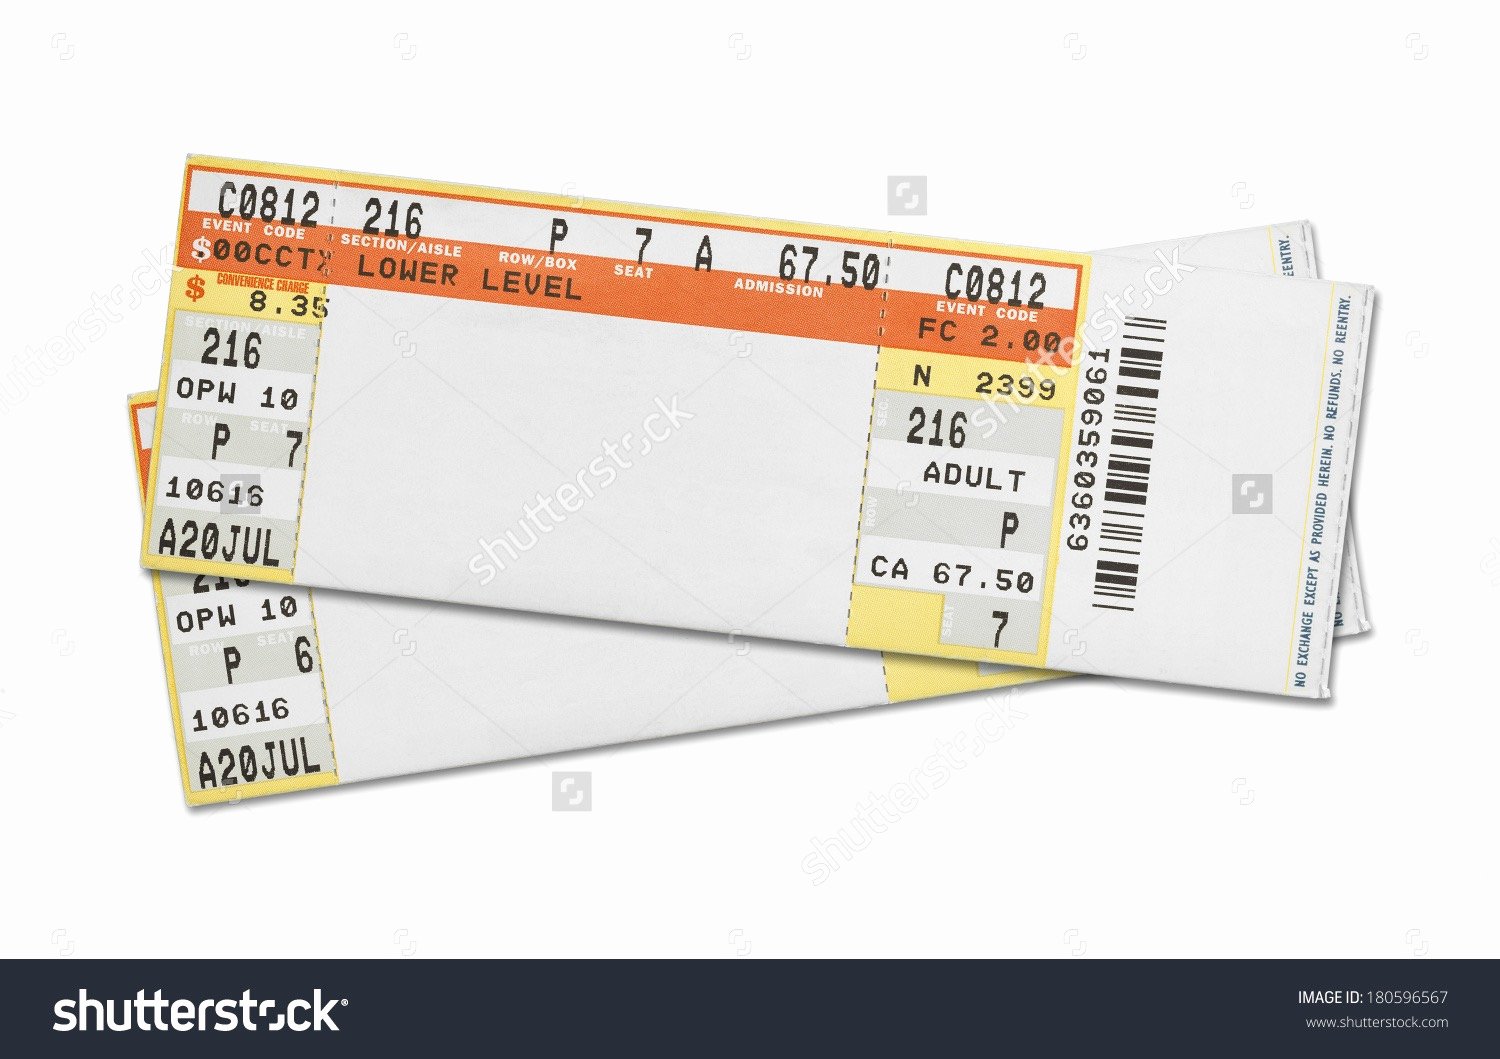 printable concert ticket template free resume templates